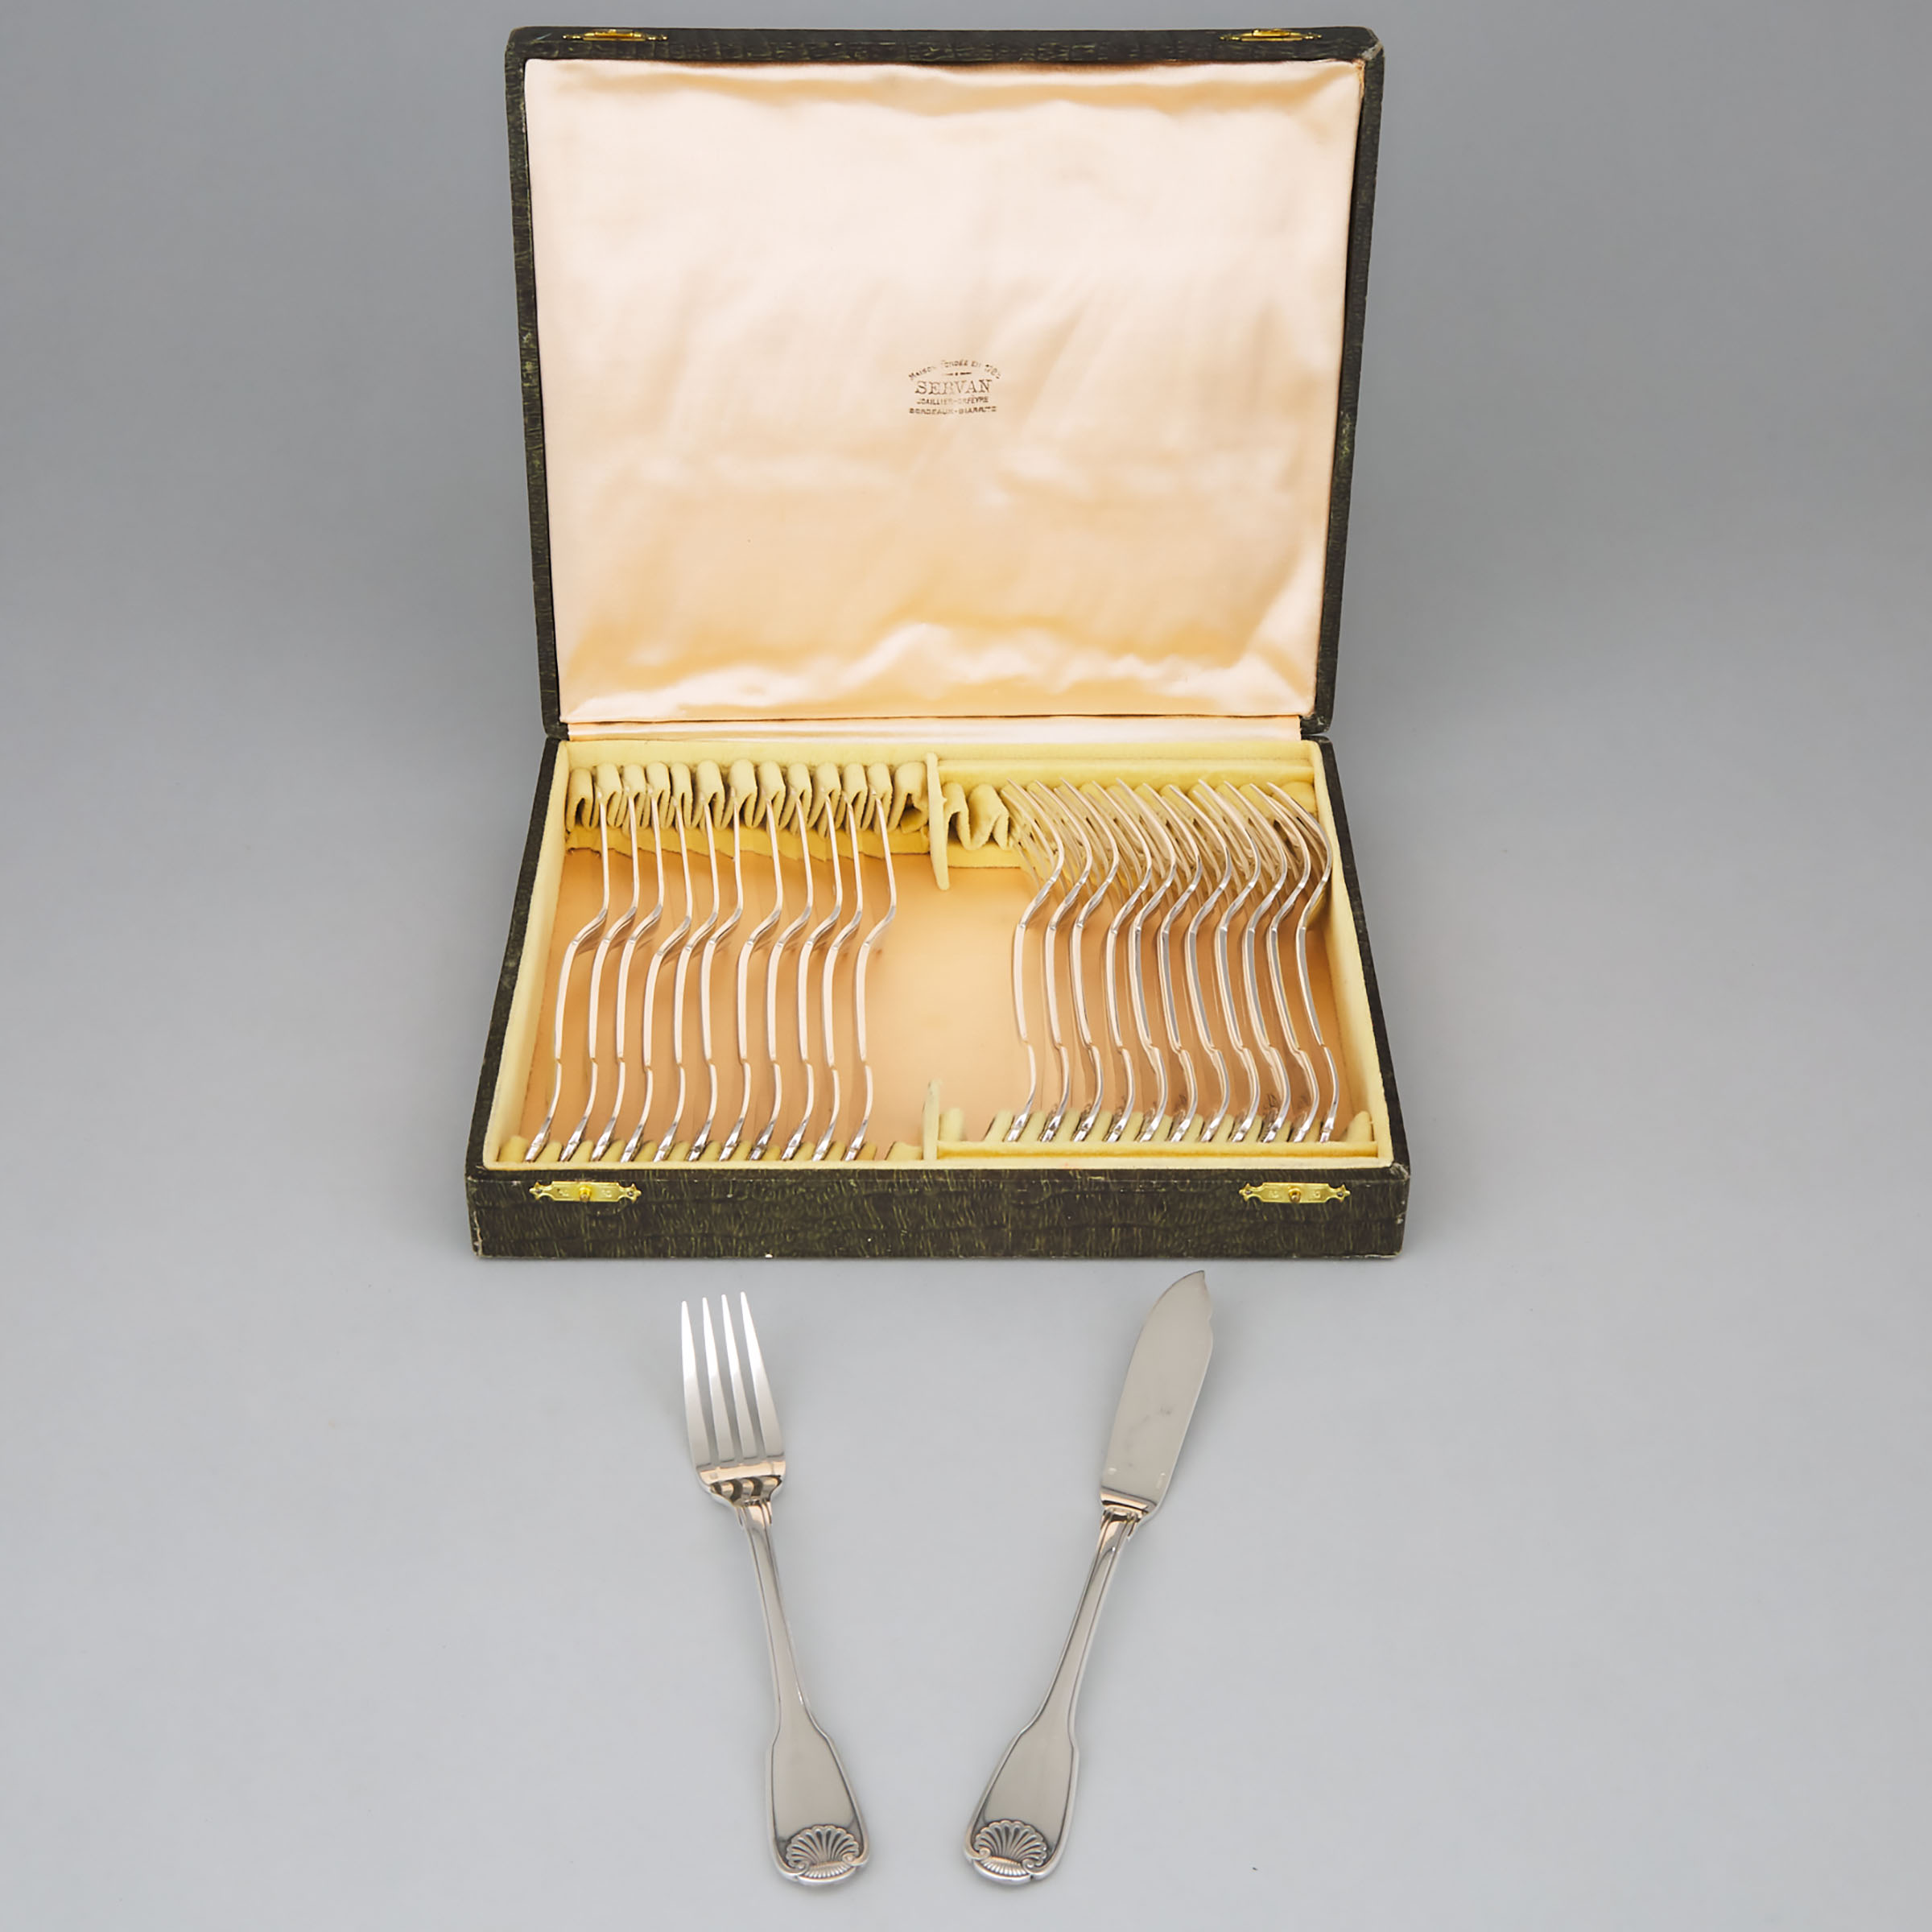 Twelve French Silver Plated ‘Vendome Arcantia’ Pattern Fish Knives and Twelve Forks, Christofle, 20th century